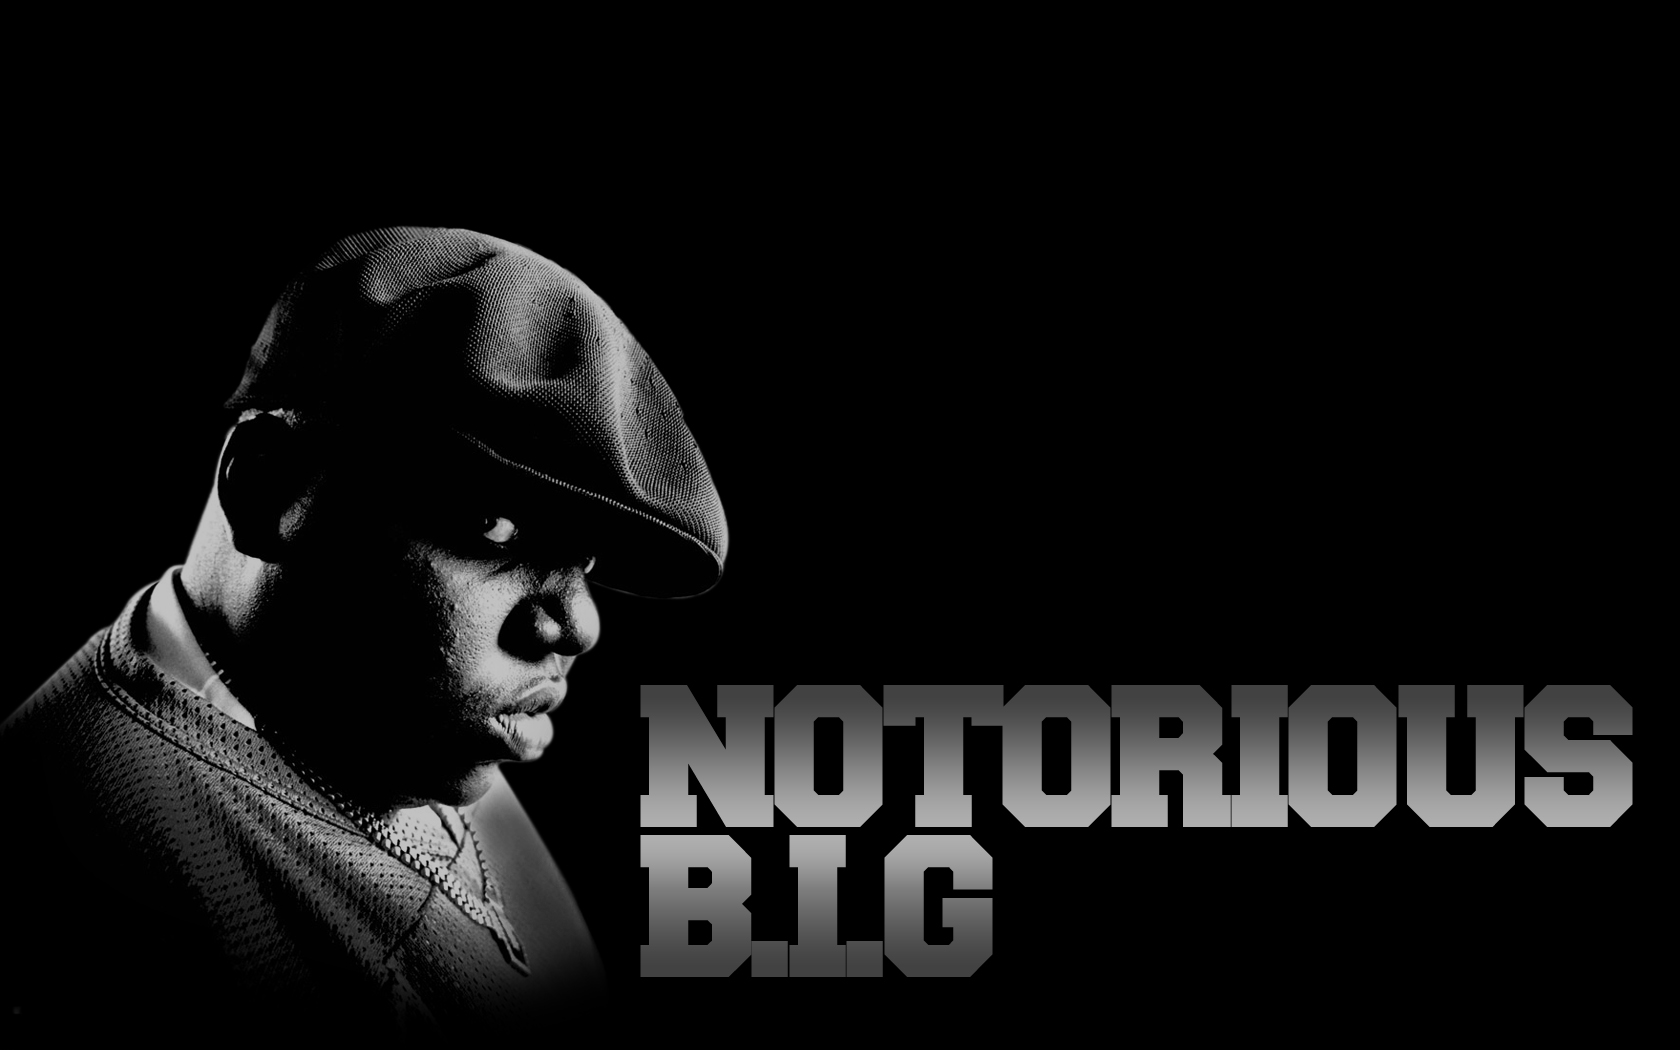 notorious big iphone wallpaper,font,text,music,darkness,photography